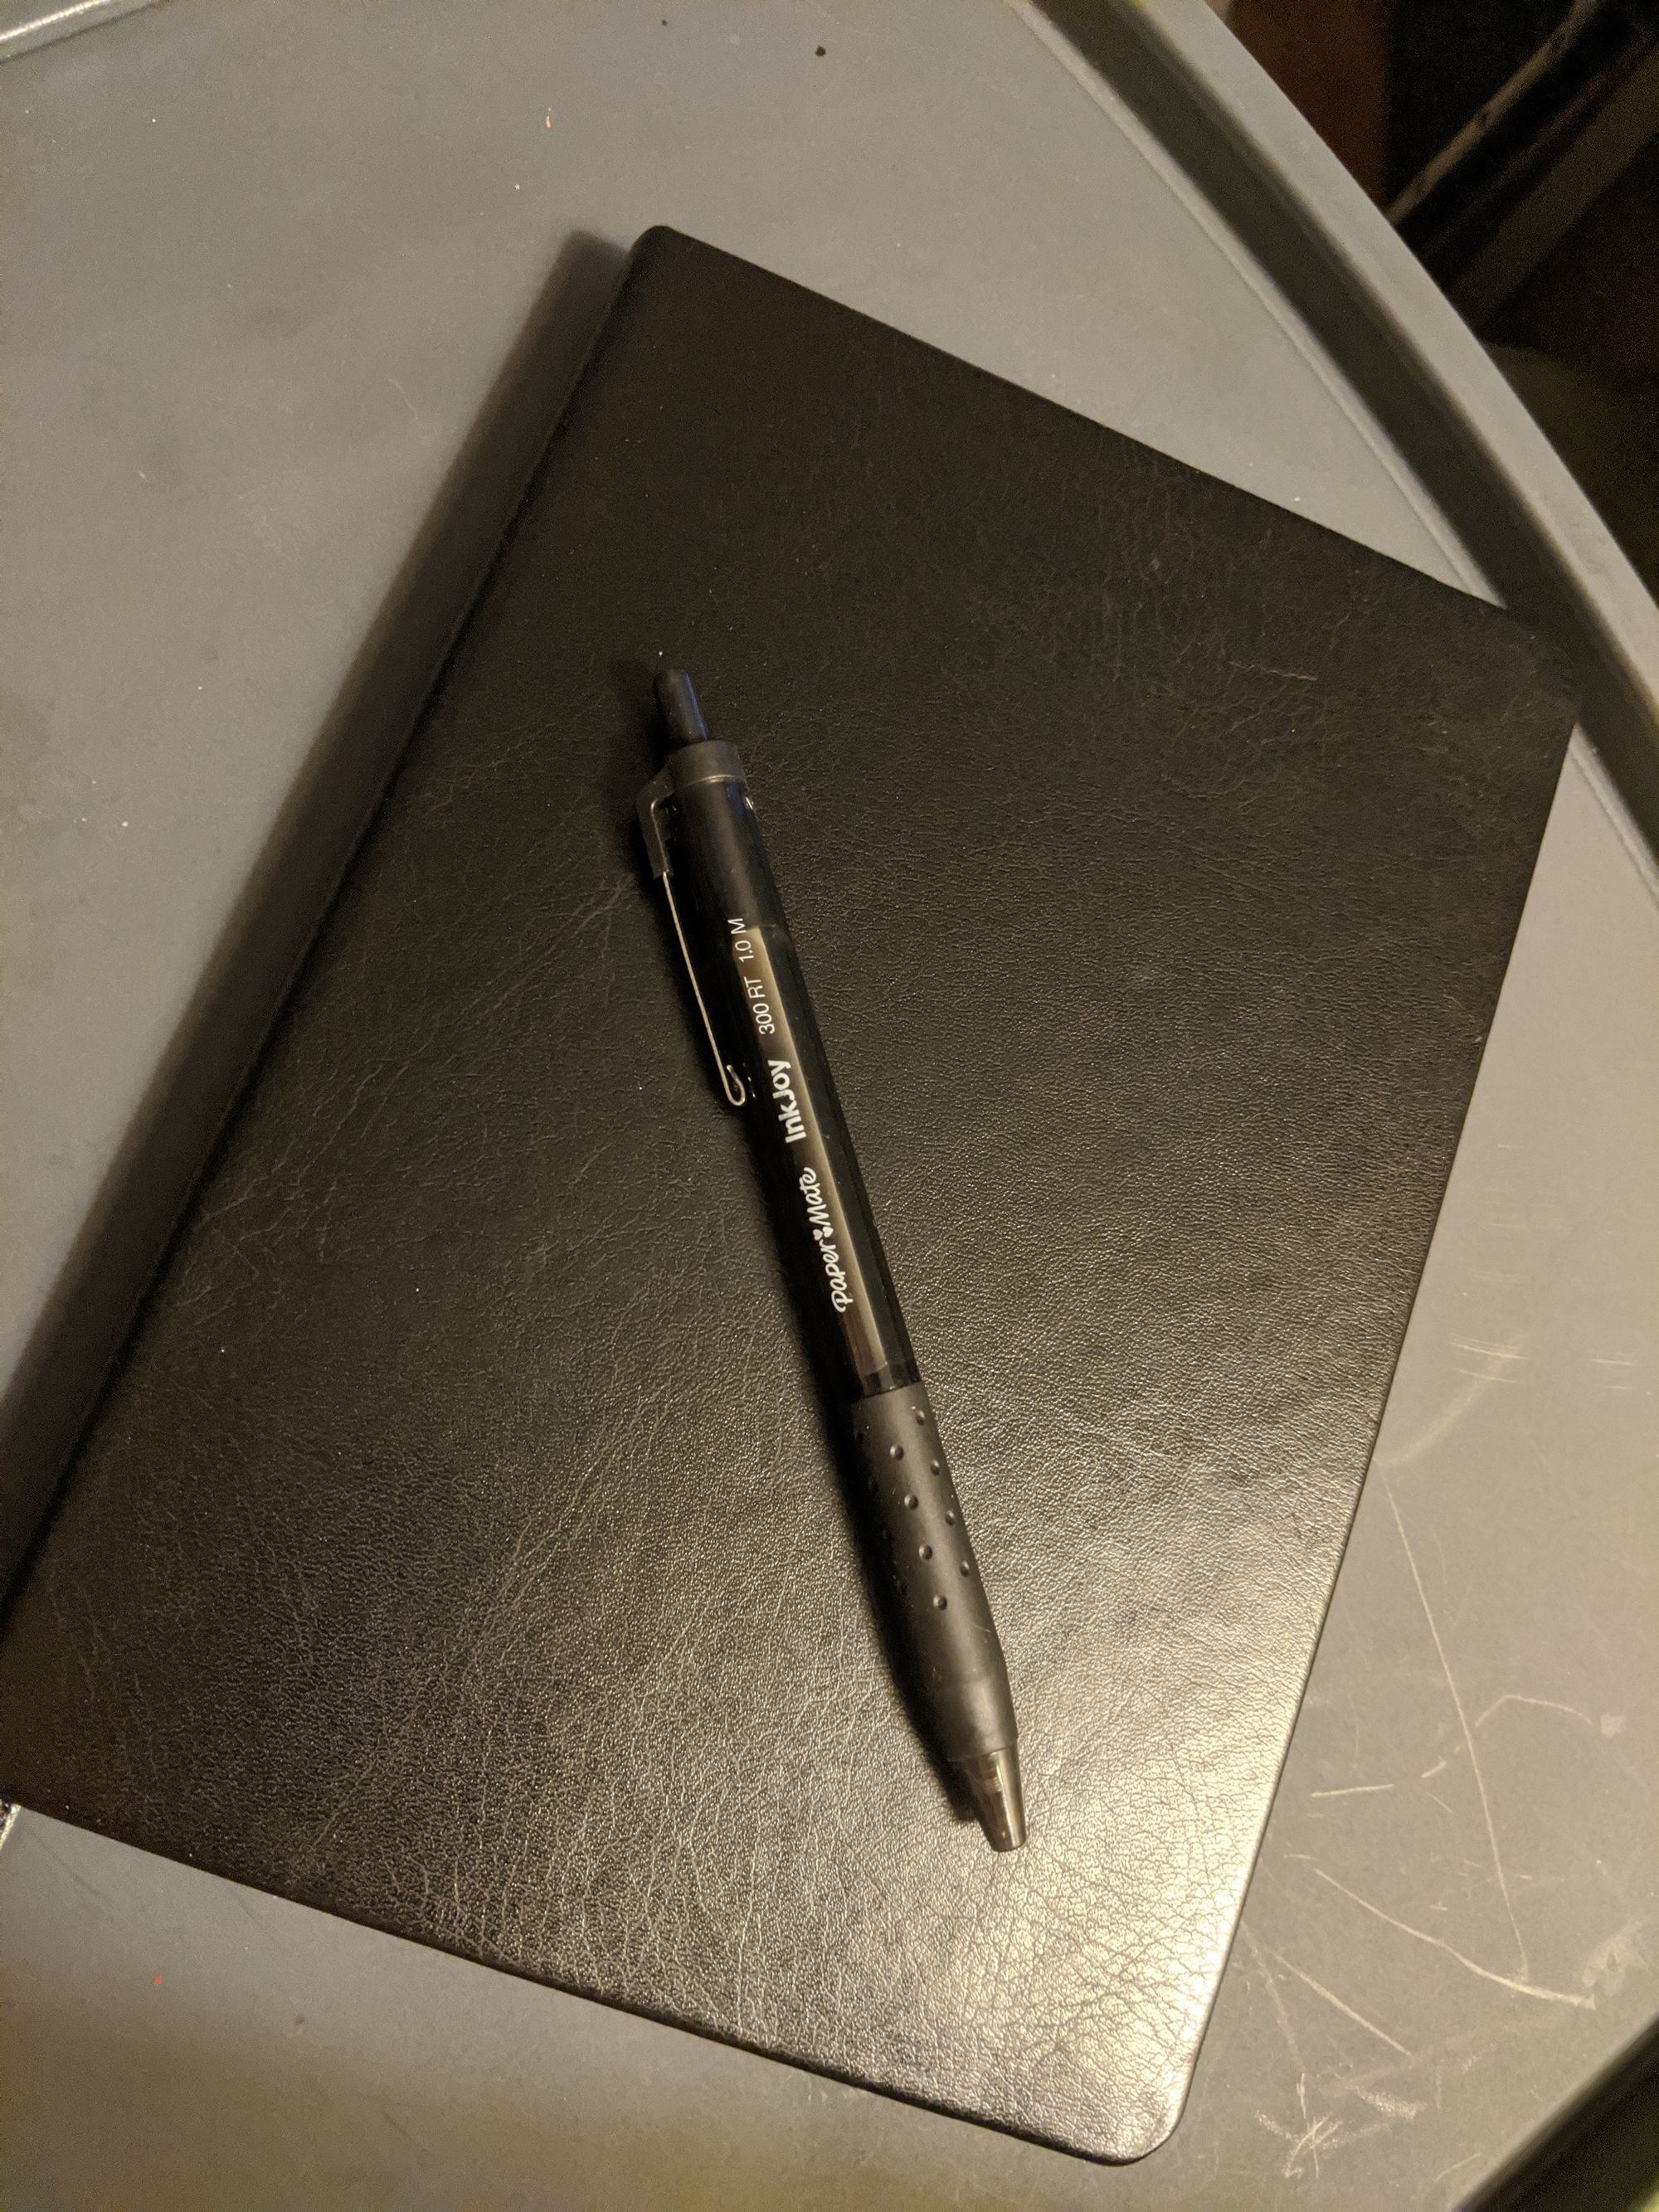 A black journal sitting on a desk, with a black pen resting on top of it.